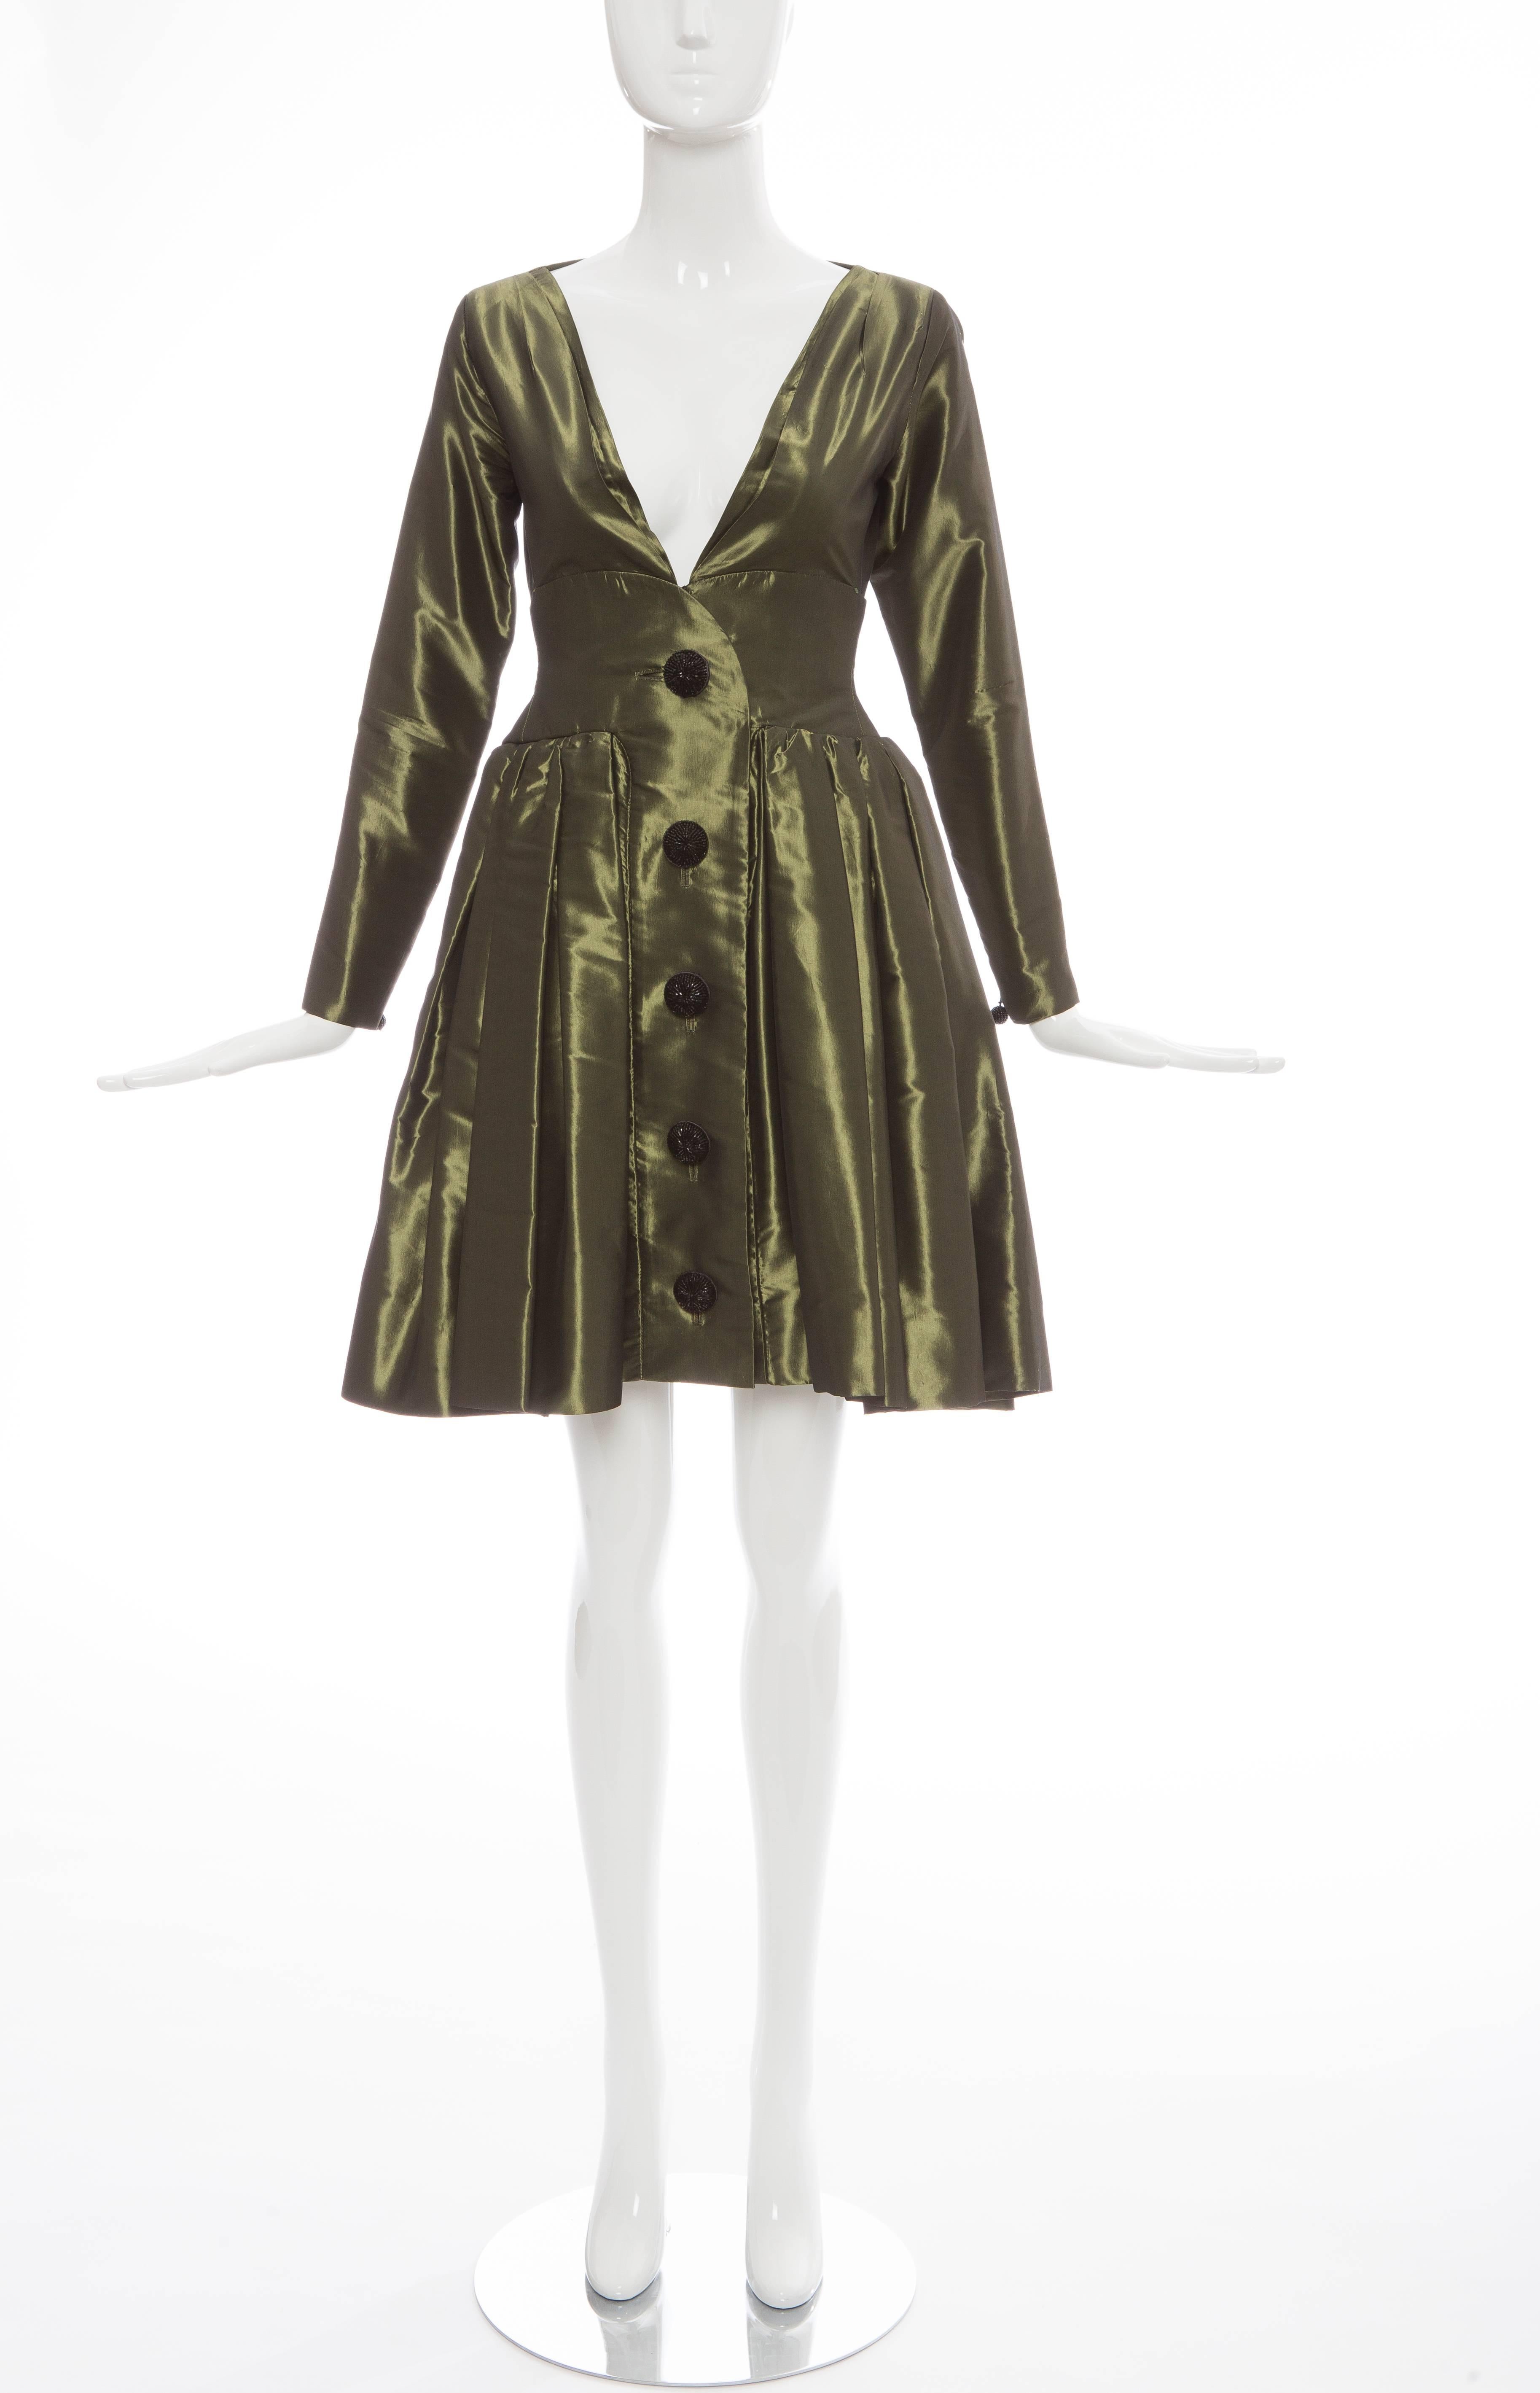 Yves Saint Laurent Rive Gauche, circa 1980's olive green silk taffeta bouffant evening dress, button front, deep V neckline, fitted waist, skirt with box pleats, long fitted zip sleeve and skirt portion is fully lined.

EU.36